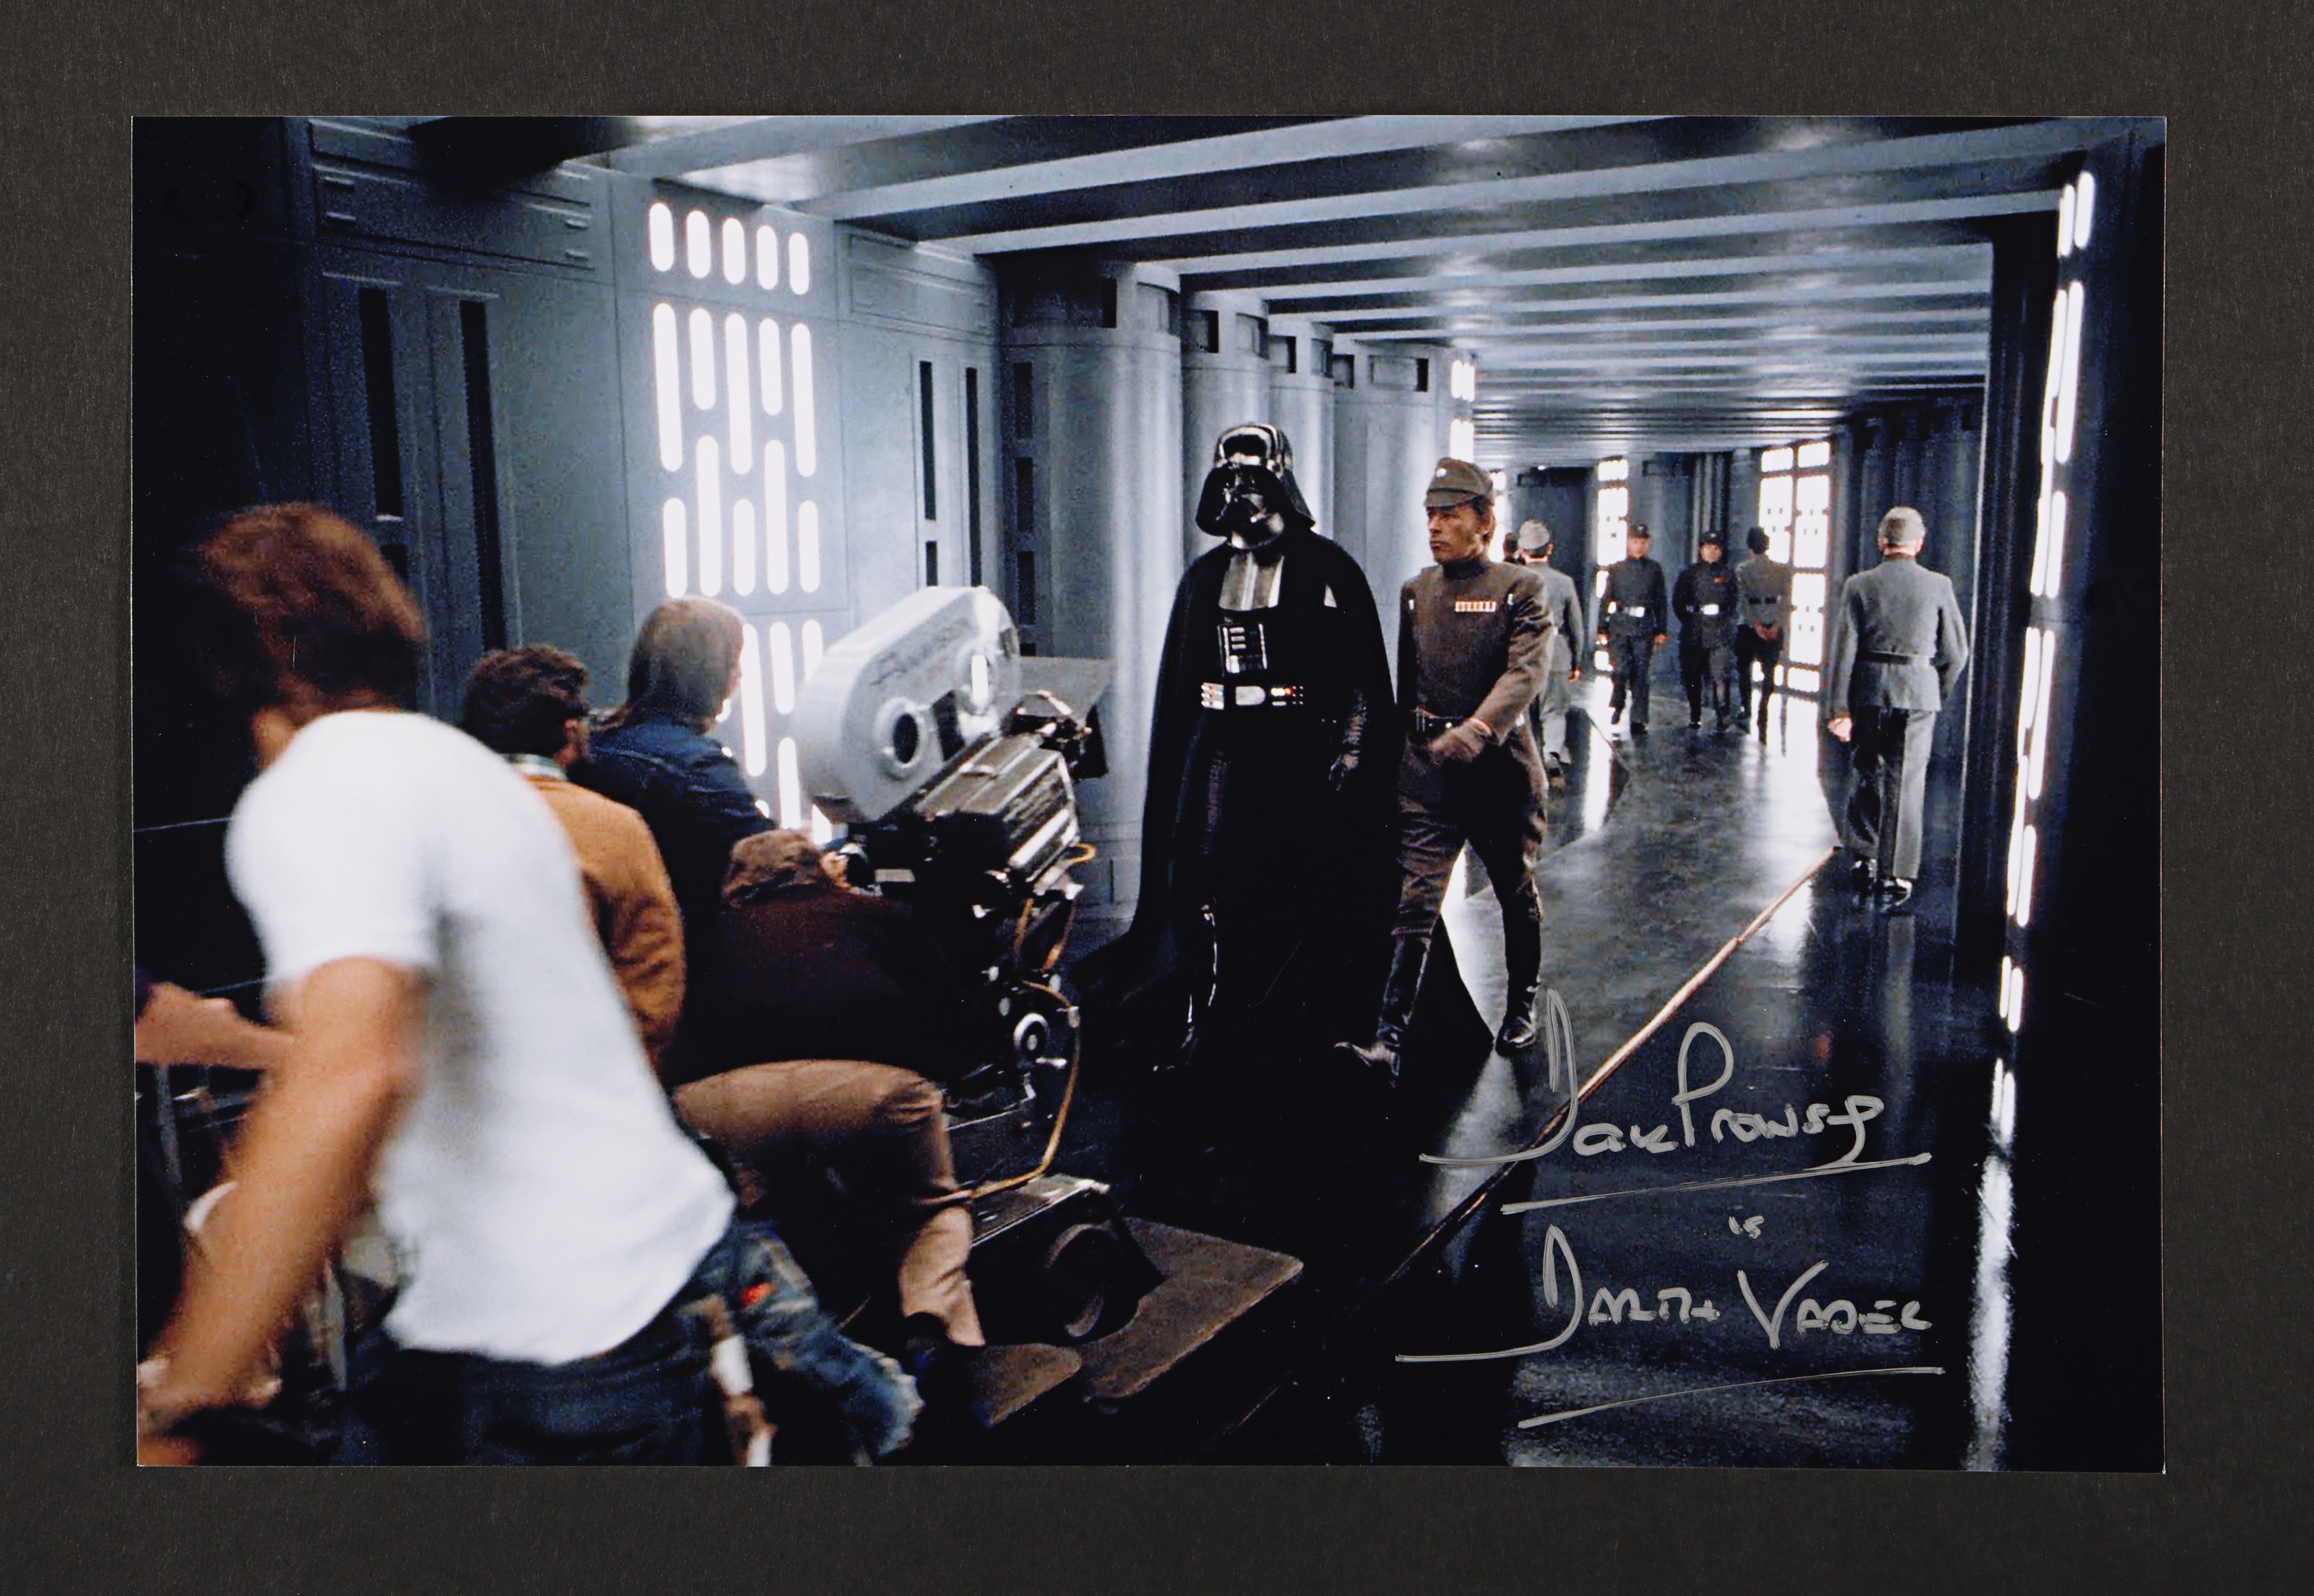 STAR WARS ORIGINAL TRILOGY (1977-83) - Dave Prowse and Jeremy Bulloch Autographed Photographs - Image 3 of 3